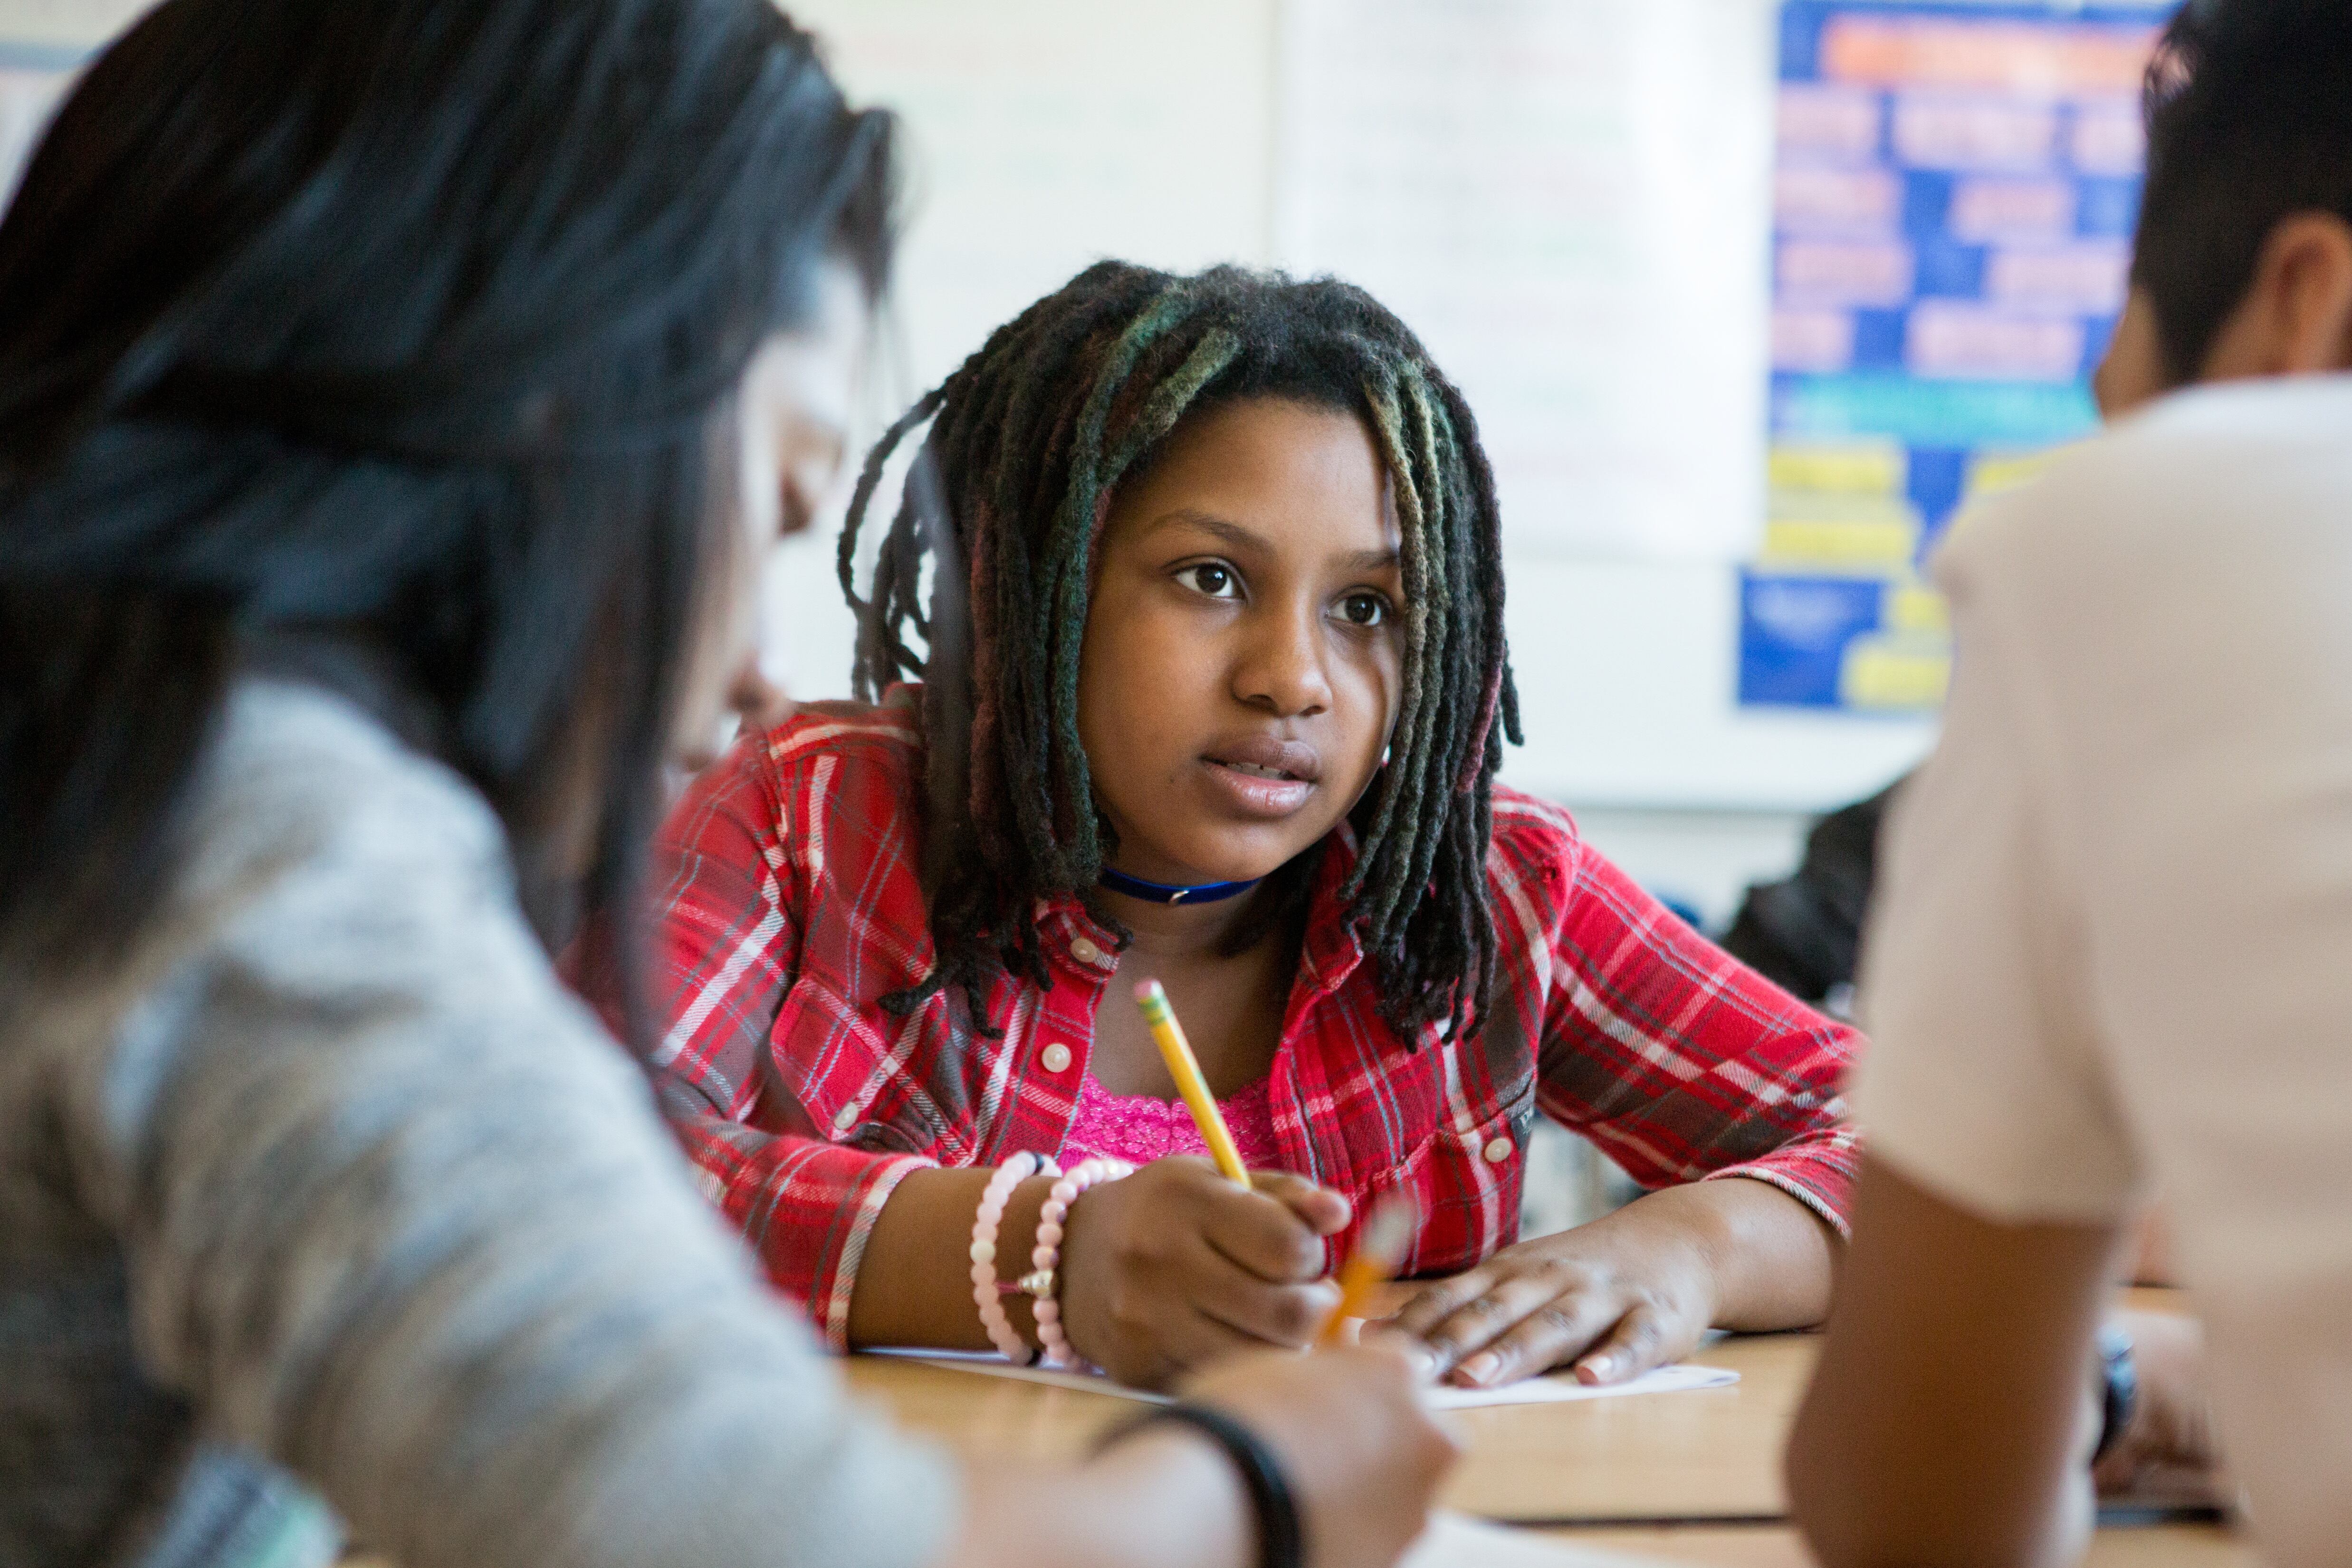 A young teenage girl with dreadlocks appears to be asking a question as she works on an assignment at a table with other students. We see her face clearly, while the other students have their backs to us and are slightly blurry.